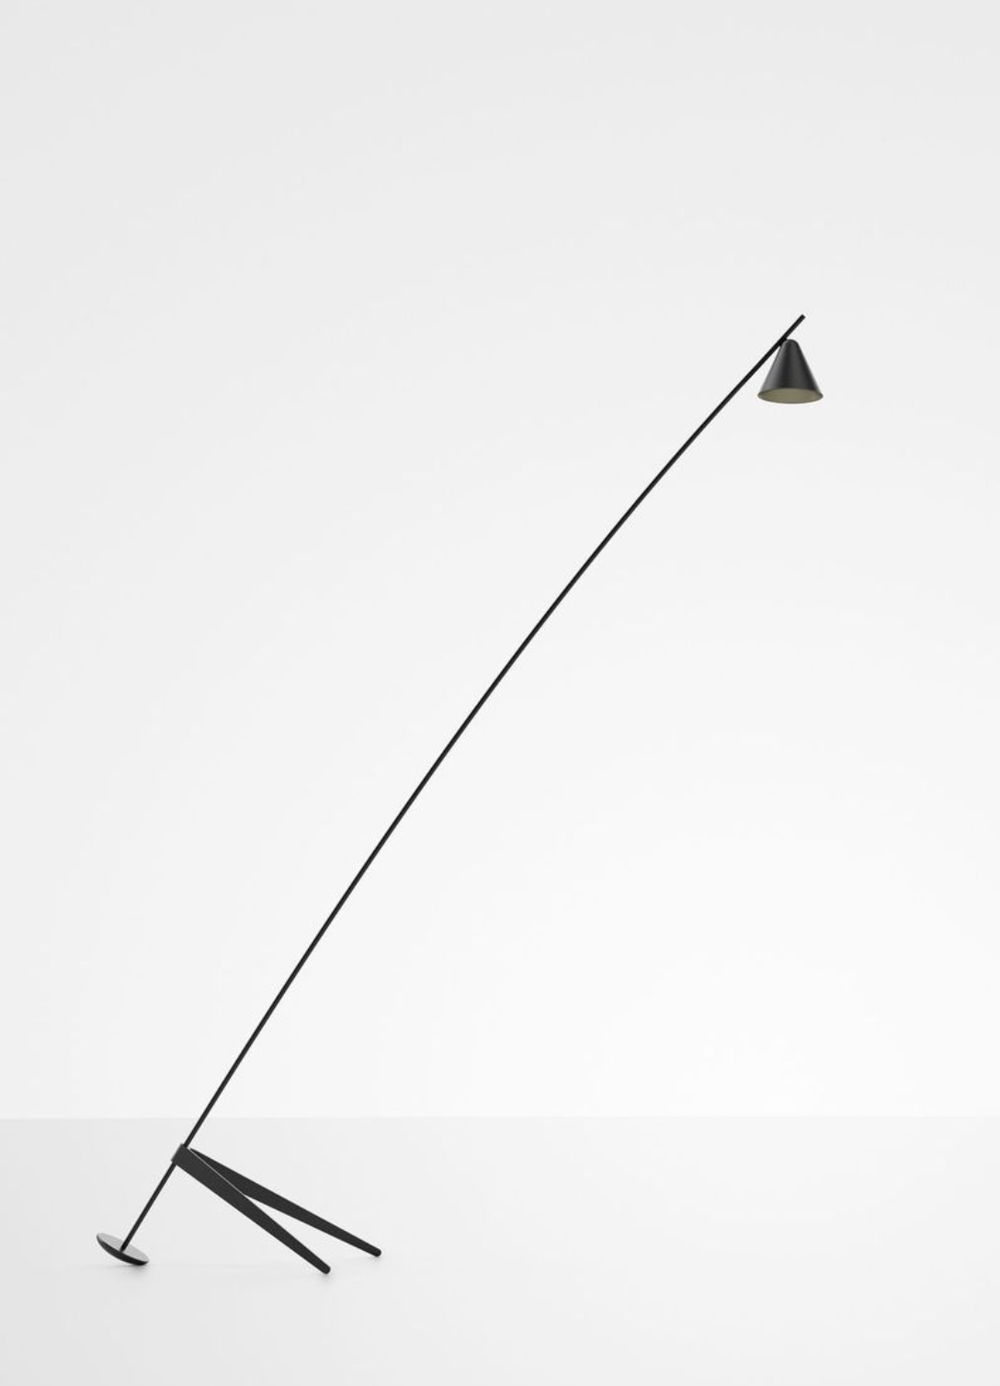 Vea by Foster+Partners for Artemide